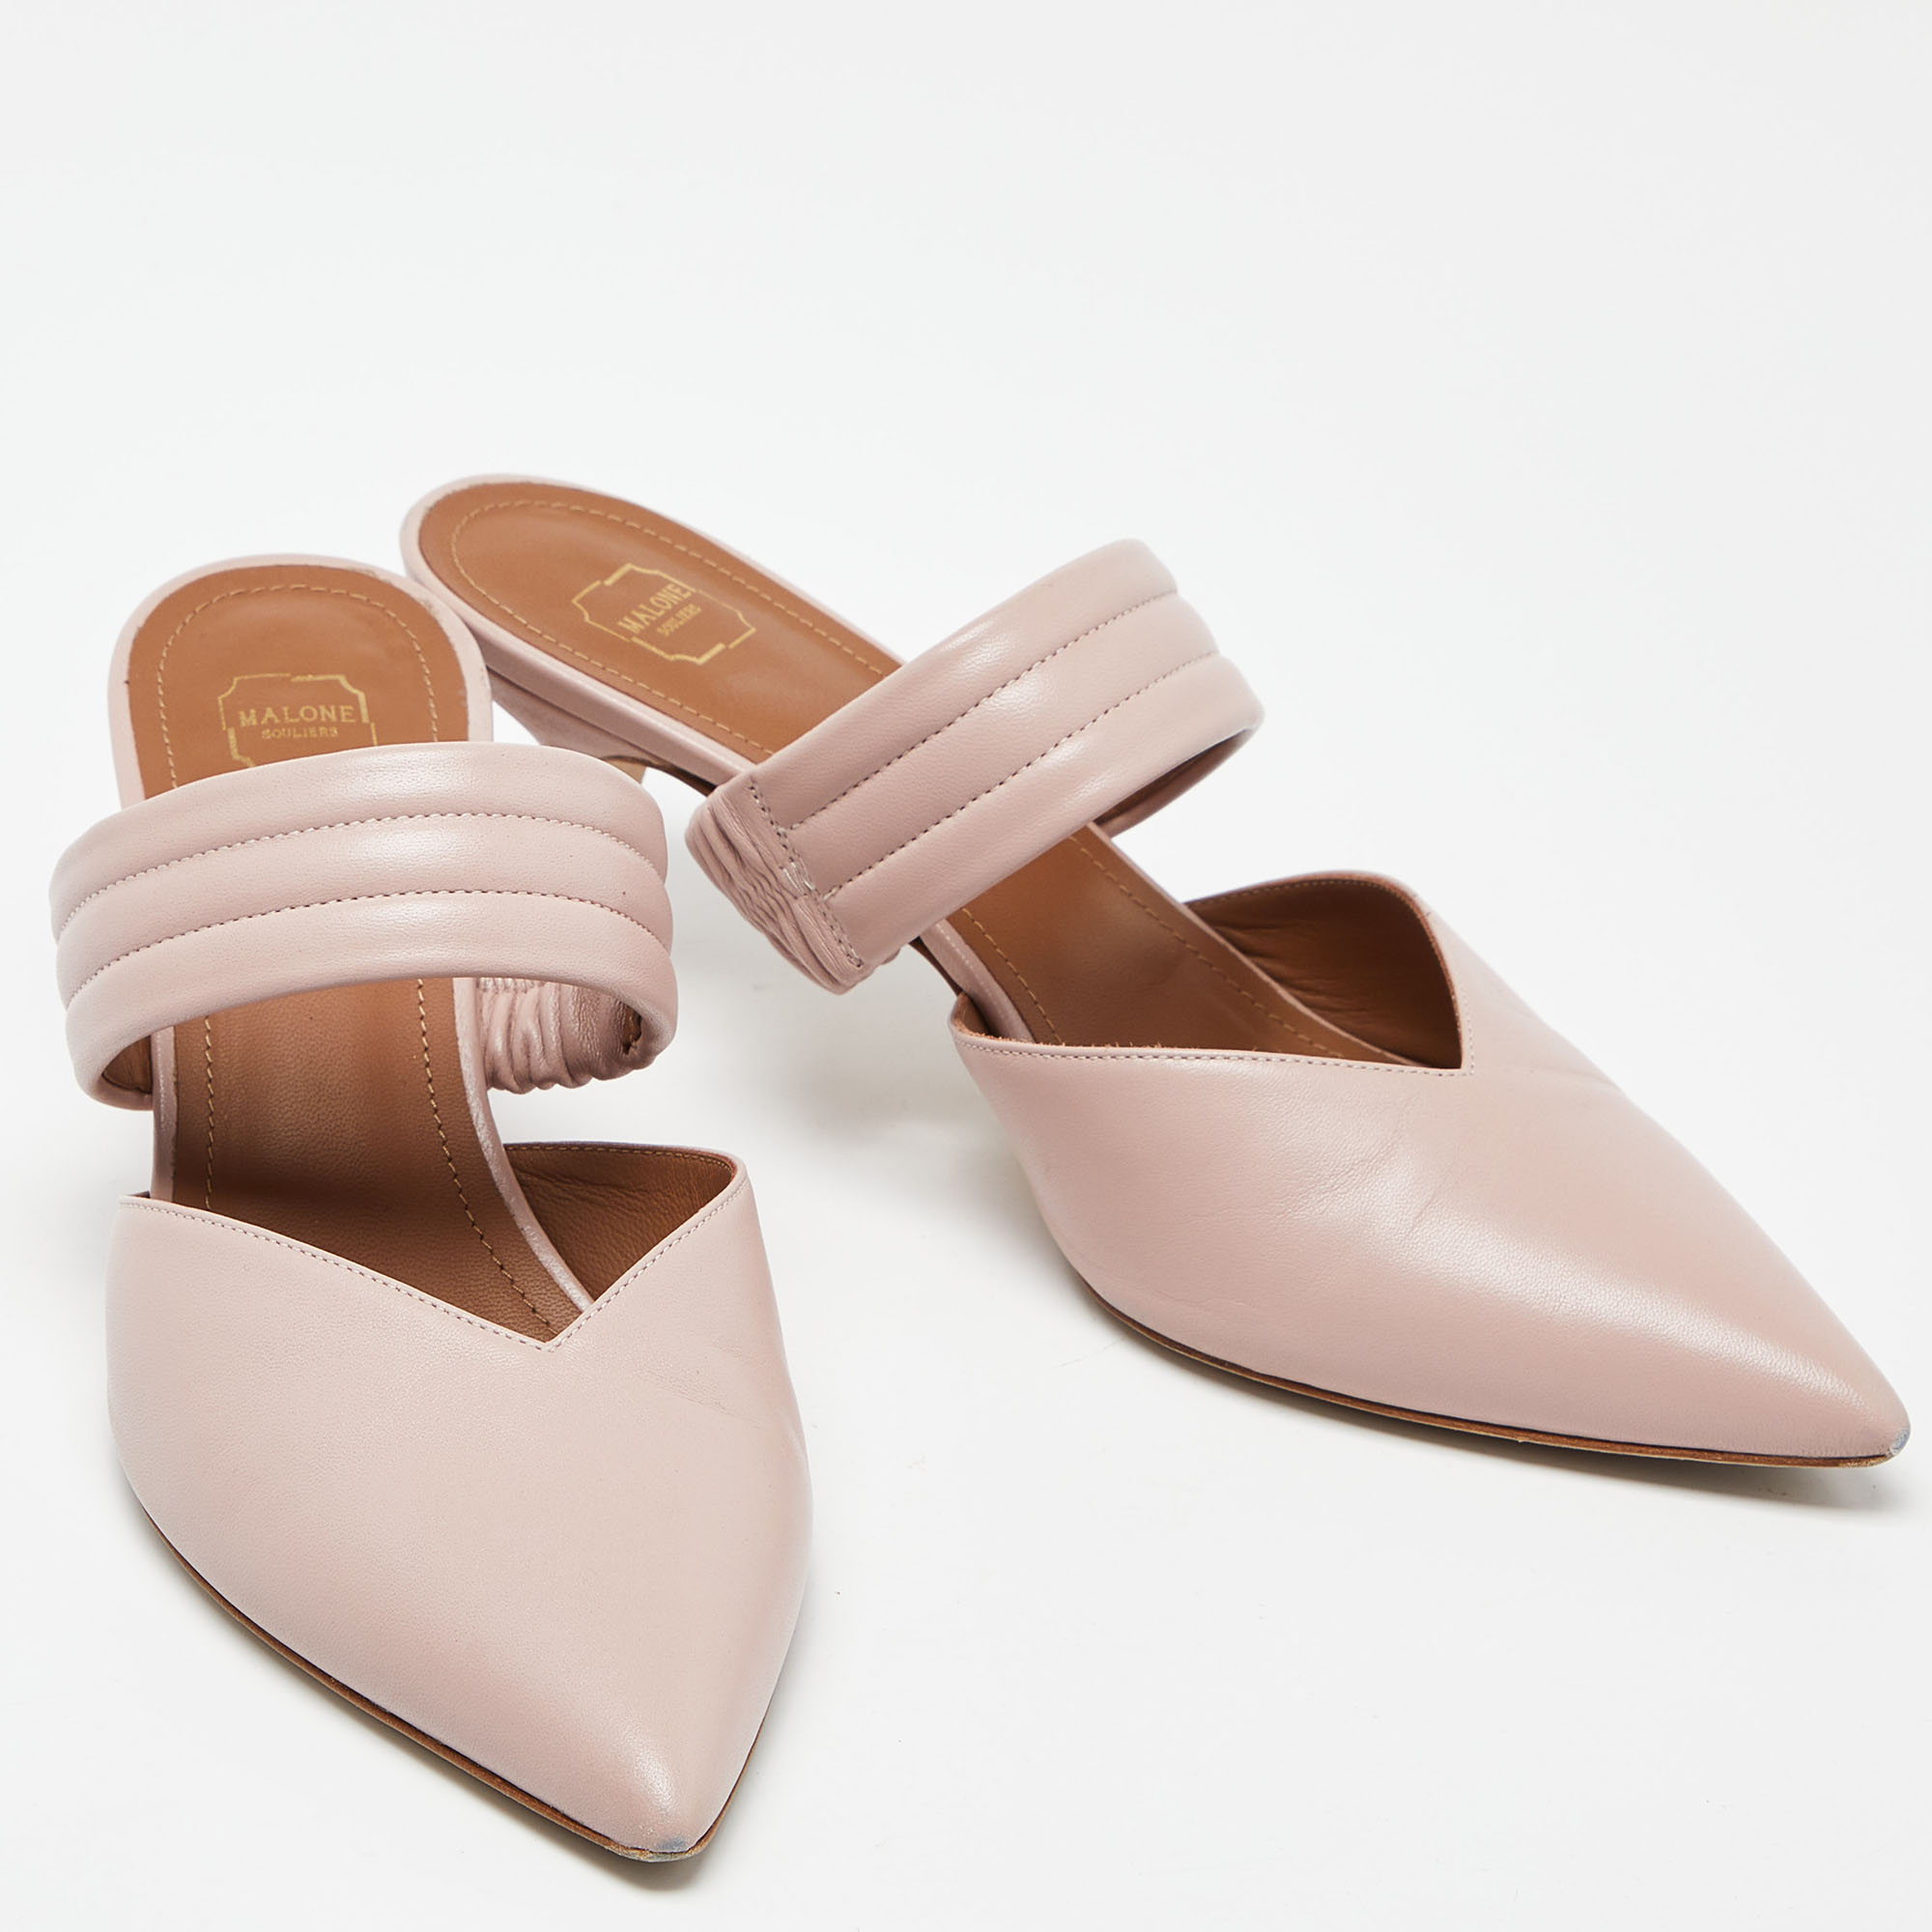 Malone Souliers Pink Leather Maisie Mules Size 39